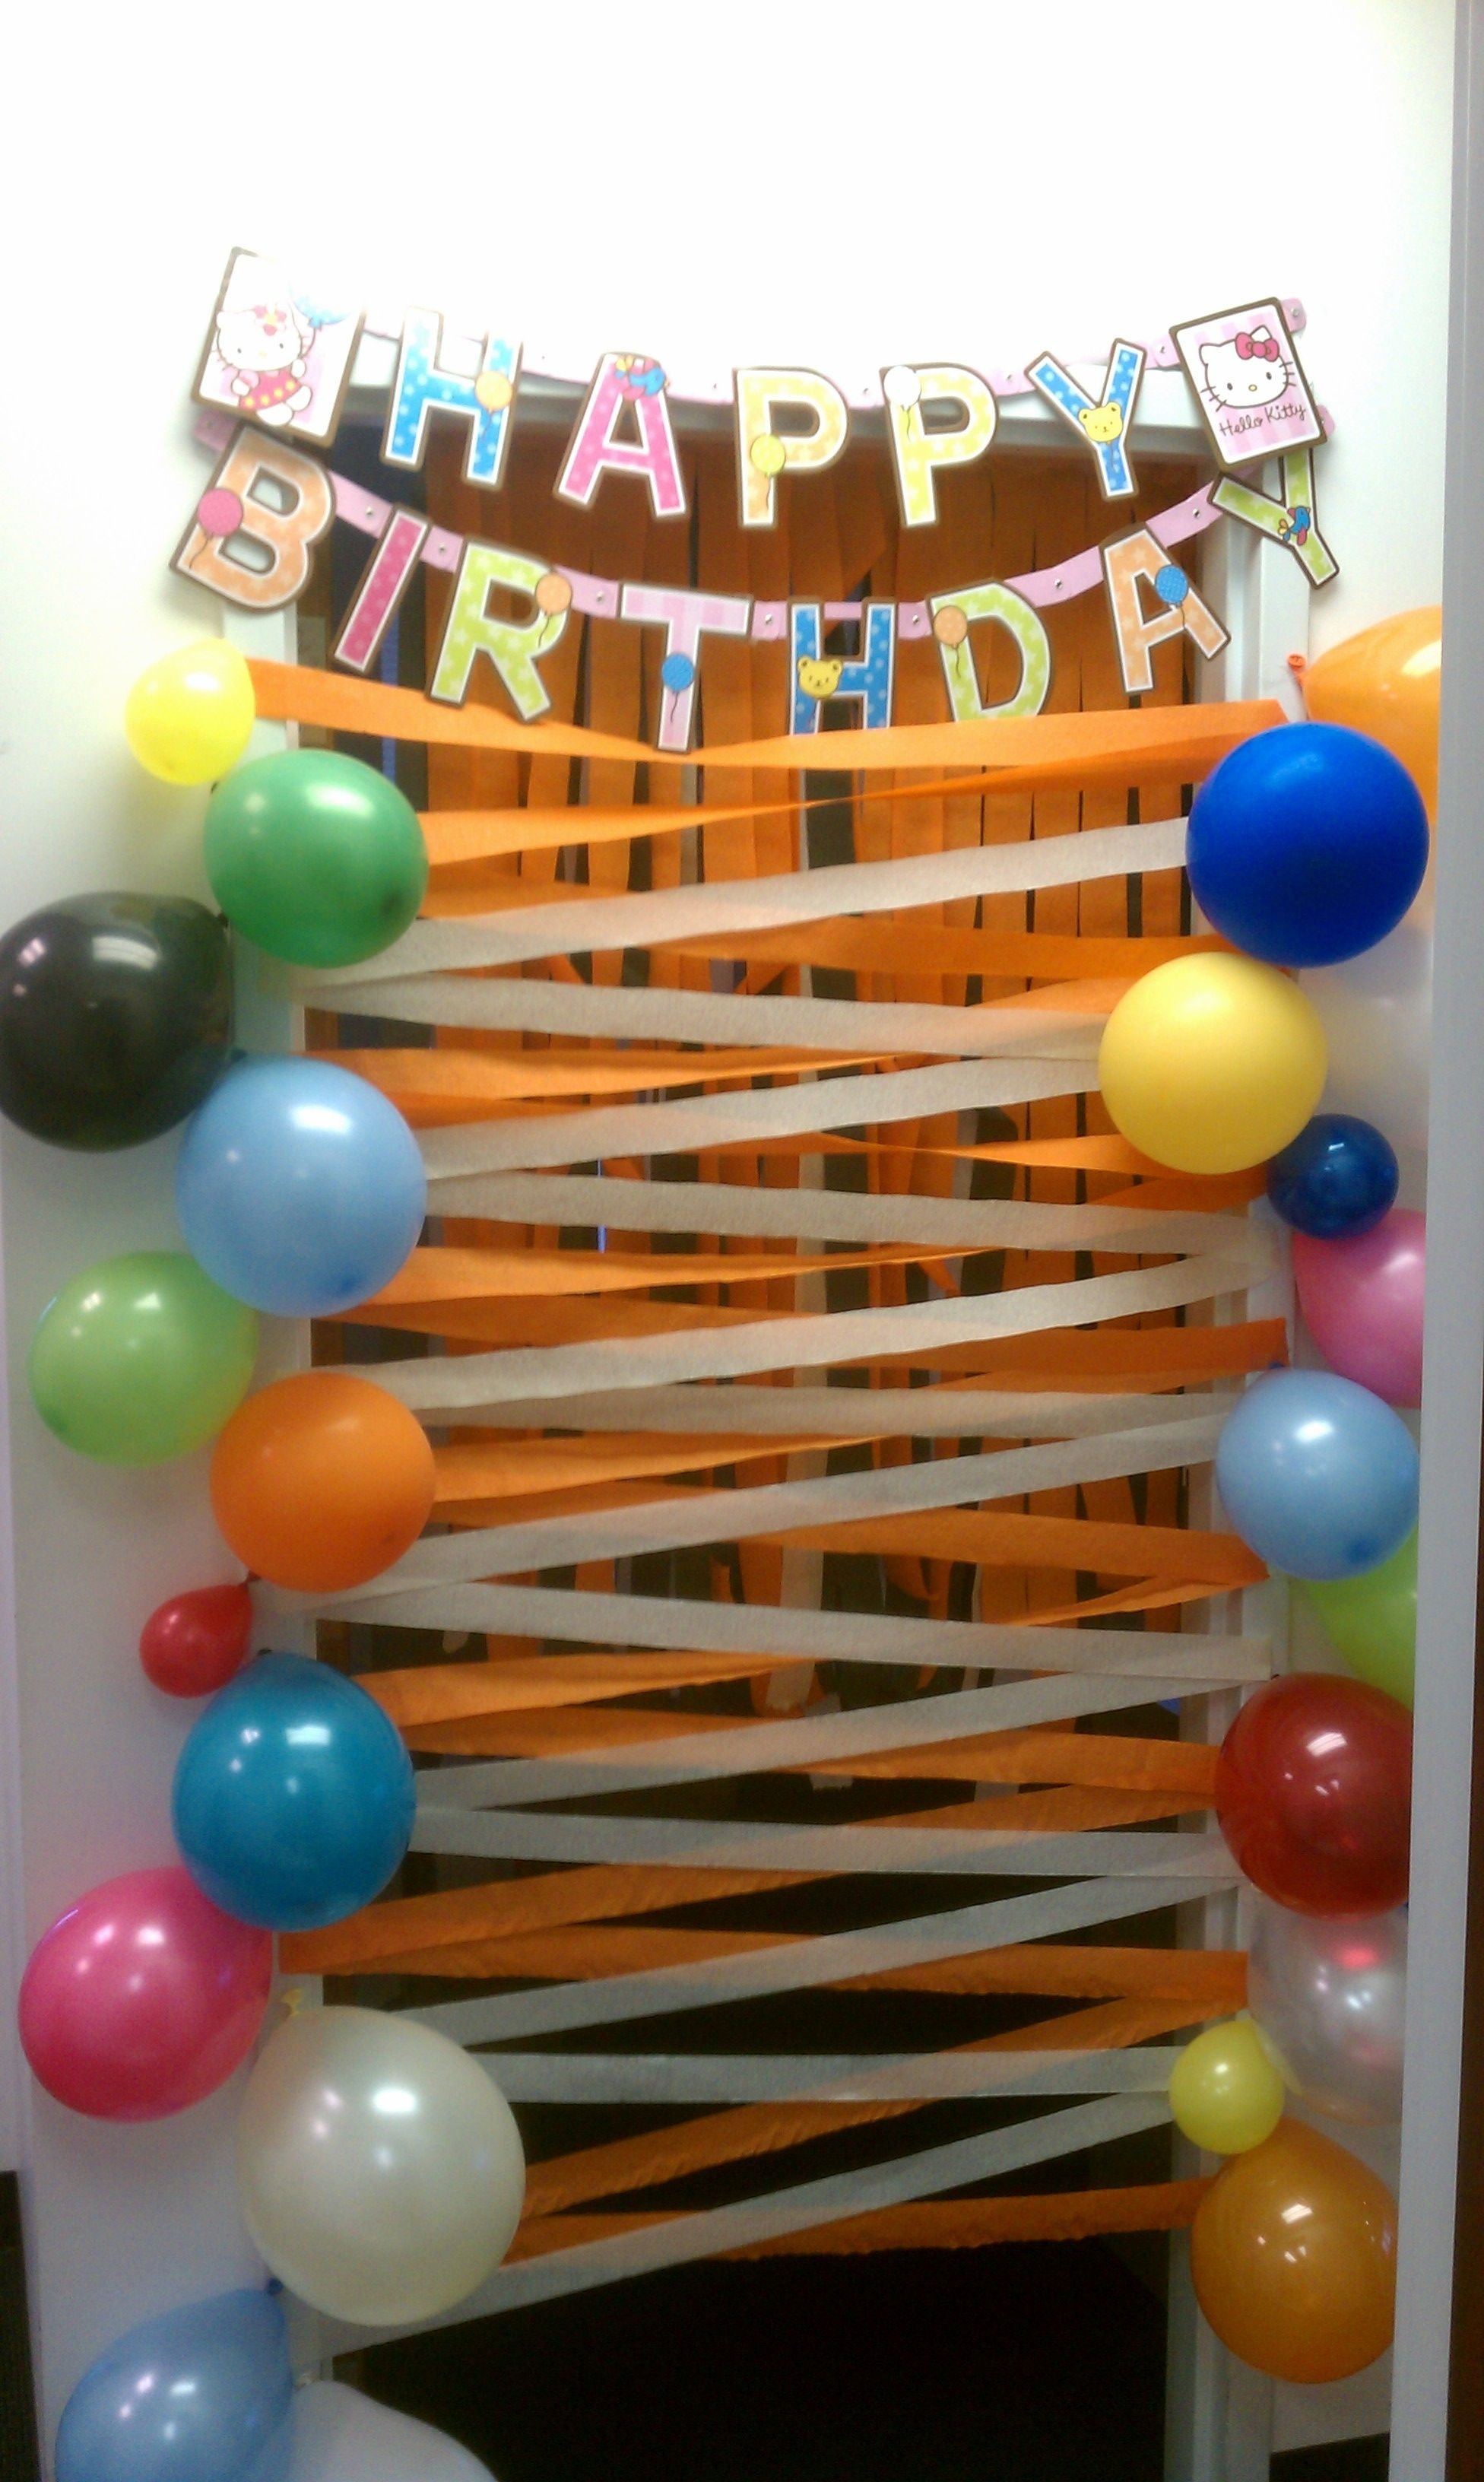 10 Amazing Creative Birthday Ideas For Husband a nice birthday surprise for my coworker birthday door decorations 1 2022